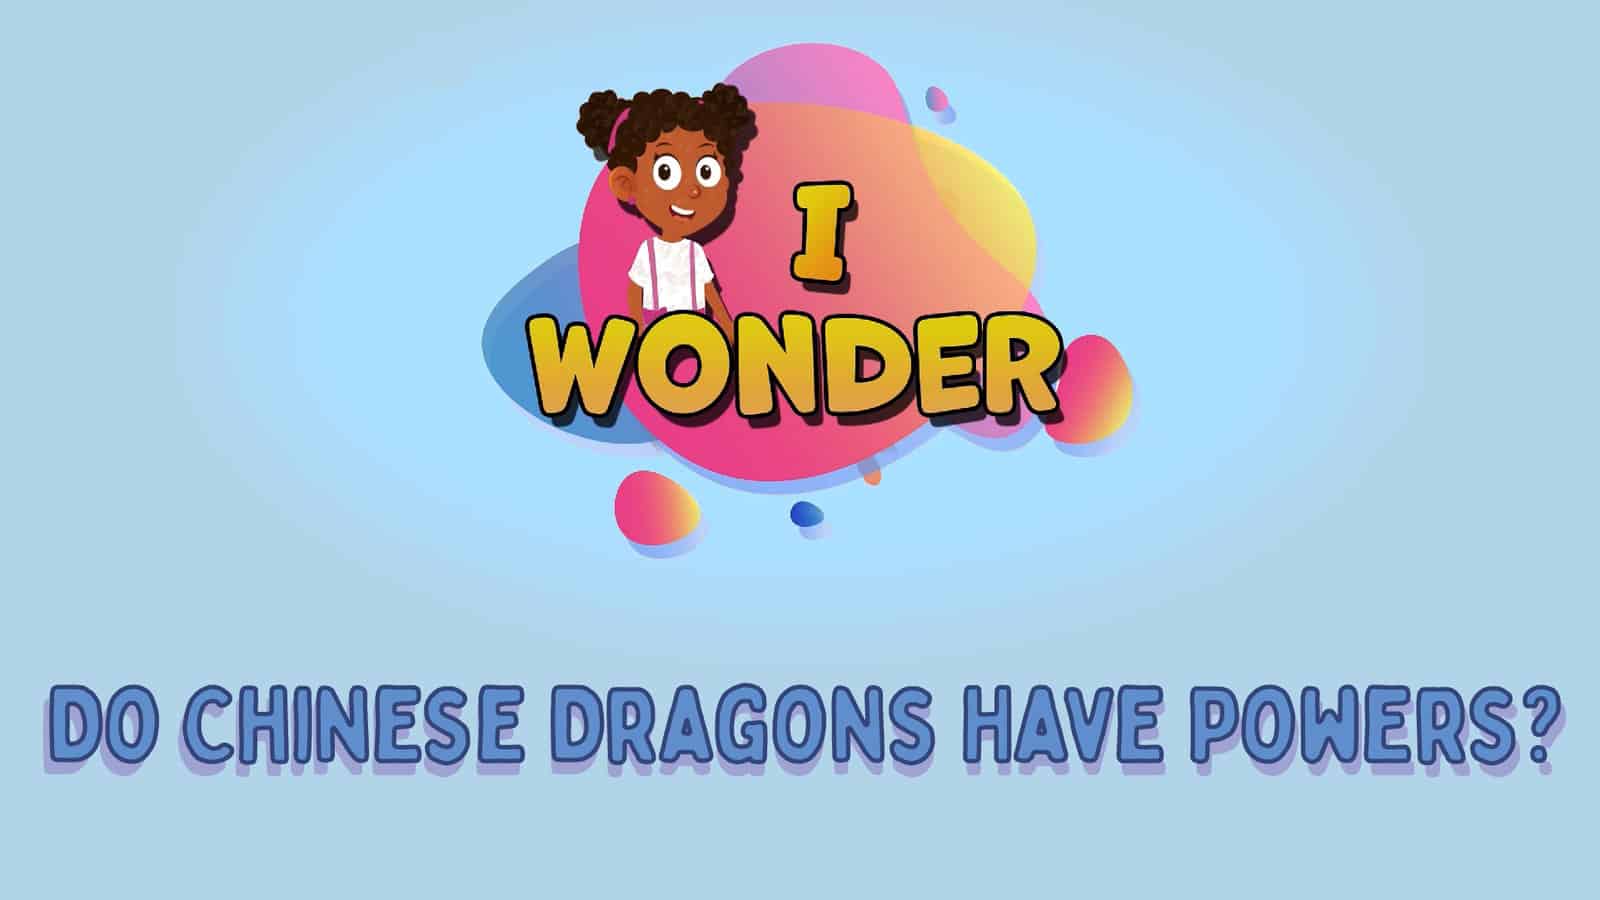 Do Chinese Dragons Have Powers?